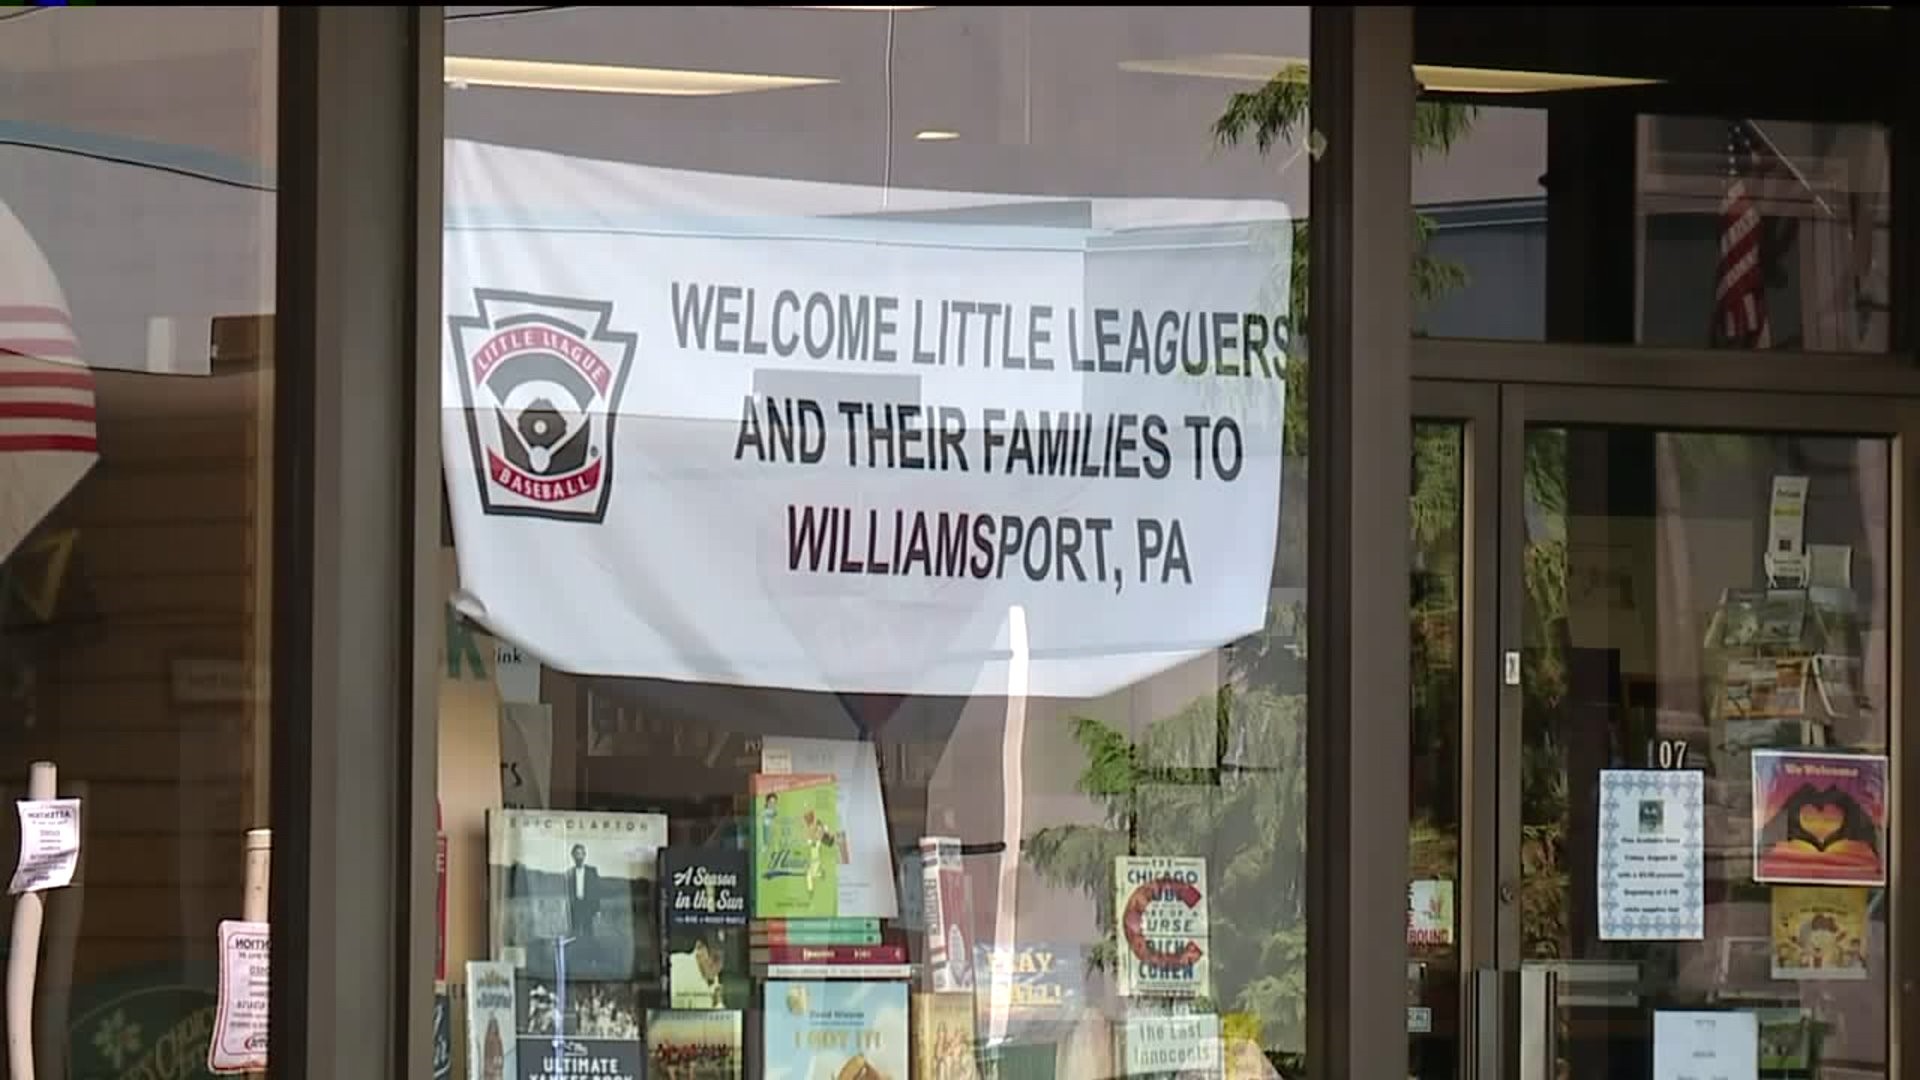 Williamsport Welcomes the World